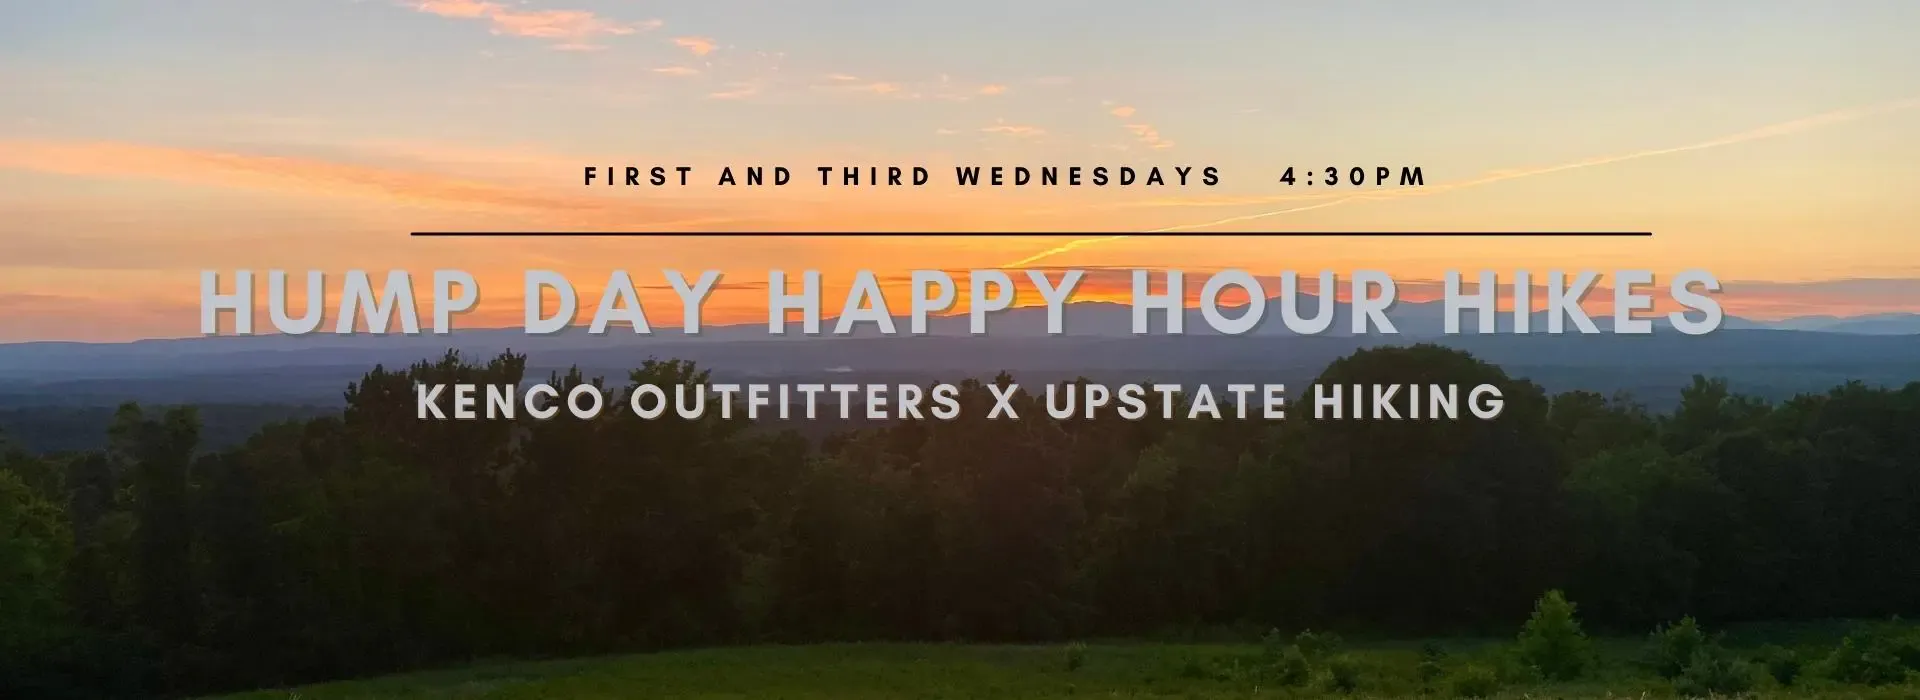 First and Third Wednesdays 4:30PM. Hump Day Happy Hour Hikes presented by Kenco Outfitters and Upstate Hiking